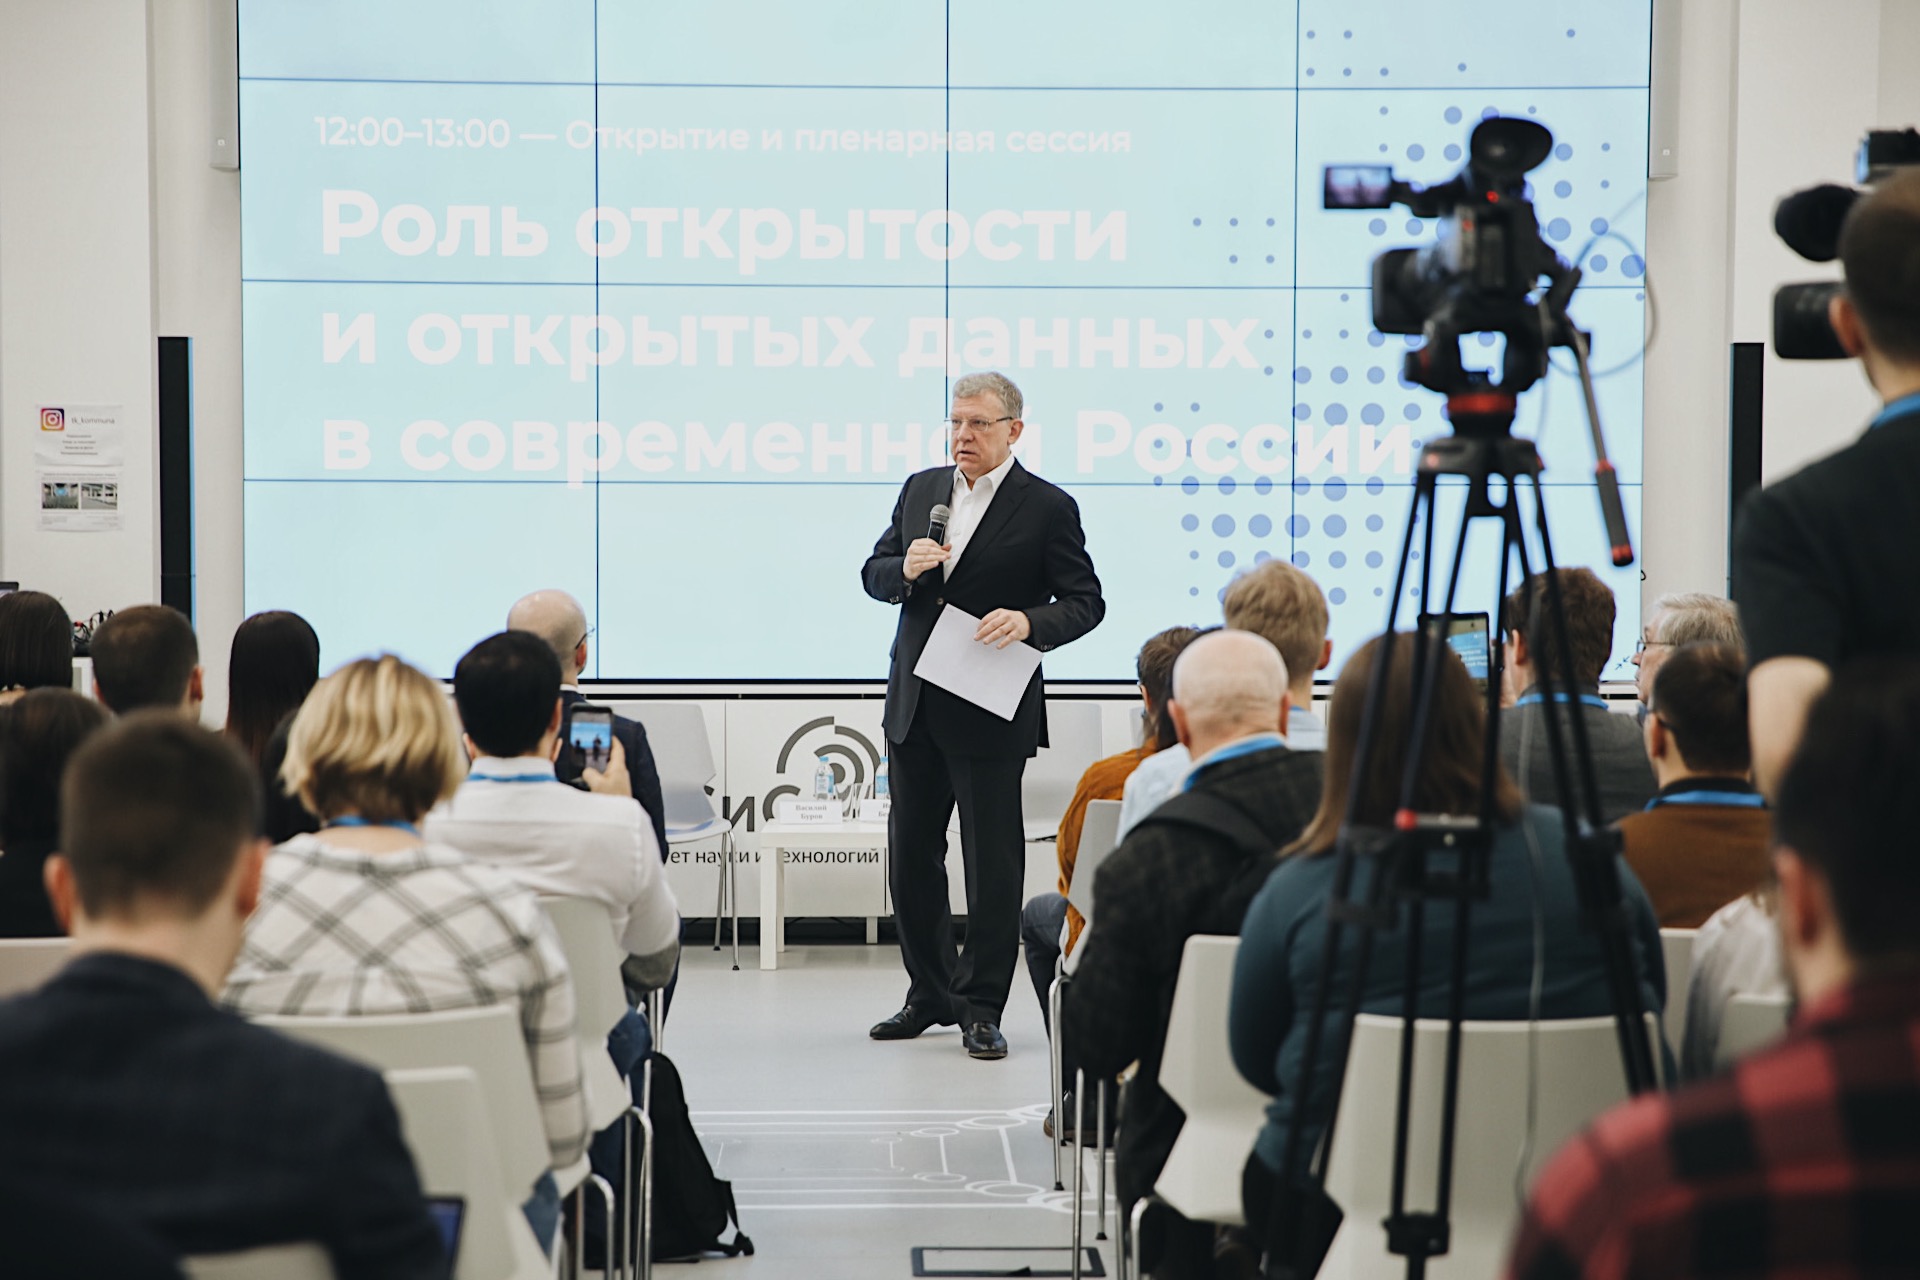 Infoculture marks Open Data Day 2020 in Moscow, Russia